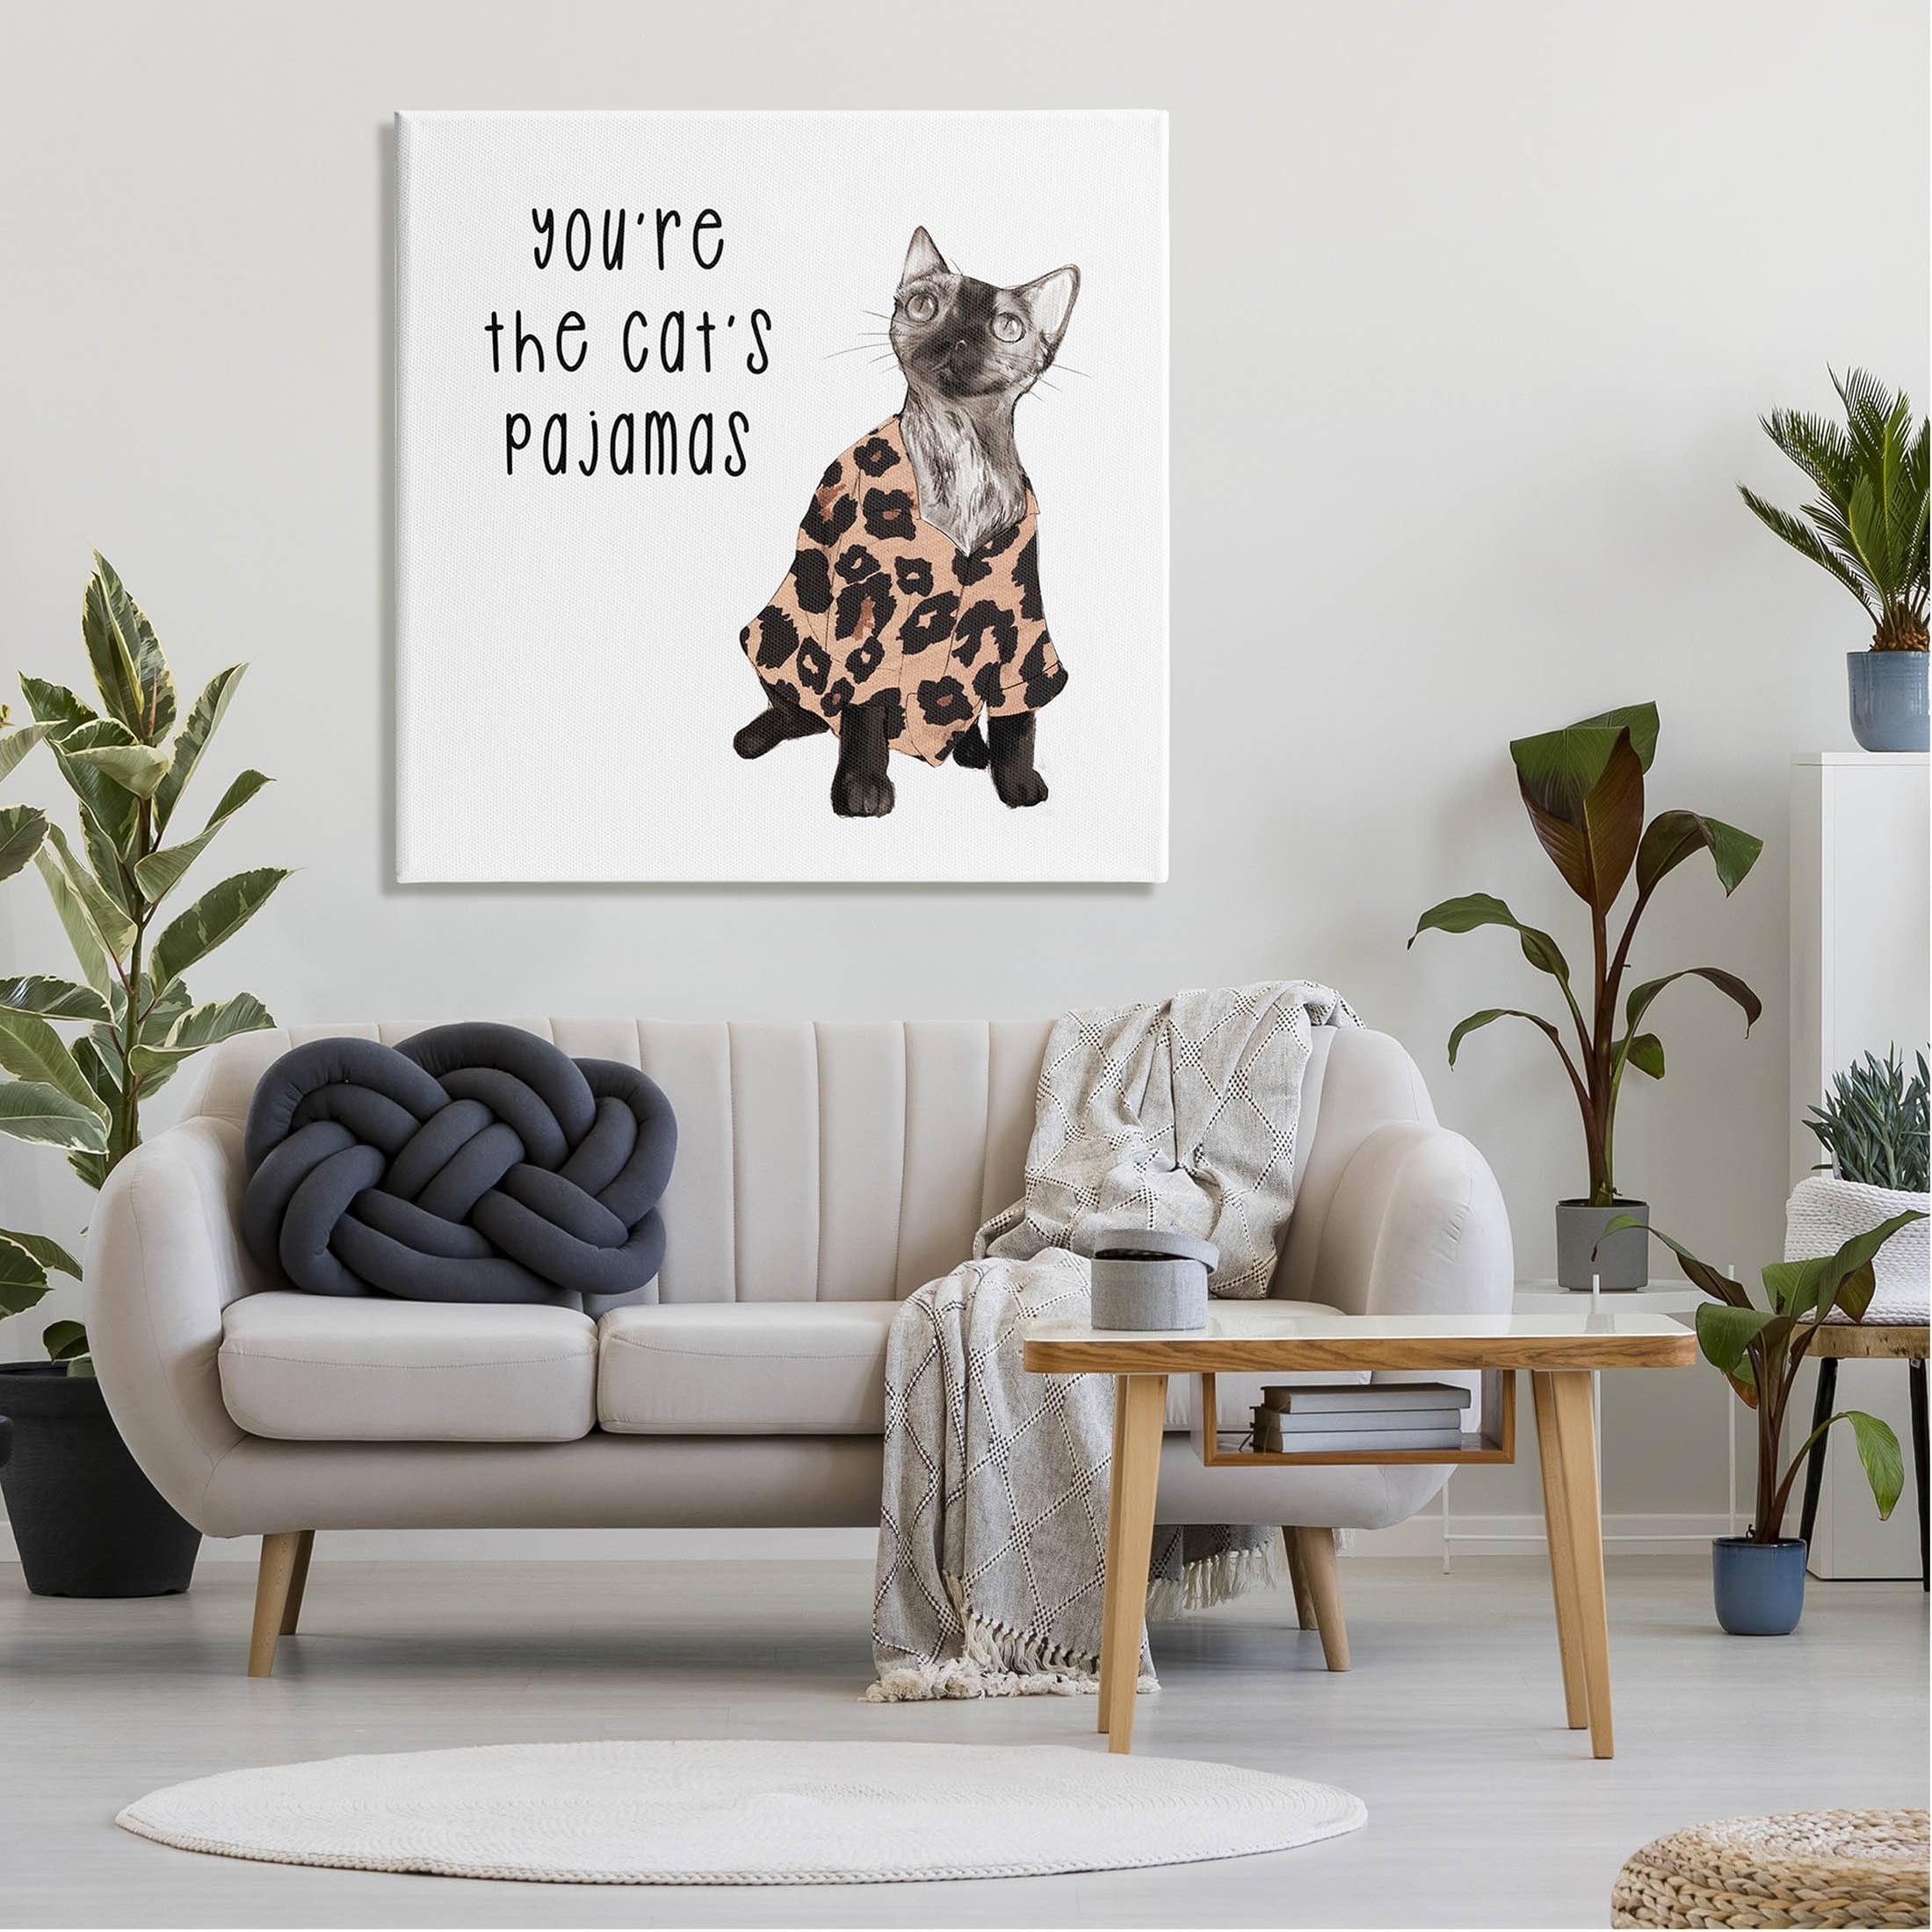 Stupell The Cat's Pajamas Humor Canvas Wall Art, Design by Lil' Rue -  Multi-Color - Bed Bath & Beyond - 36971120